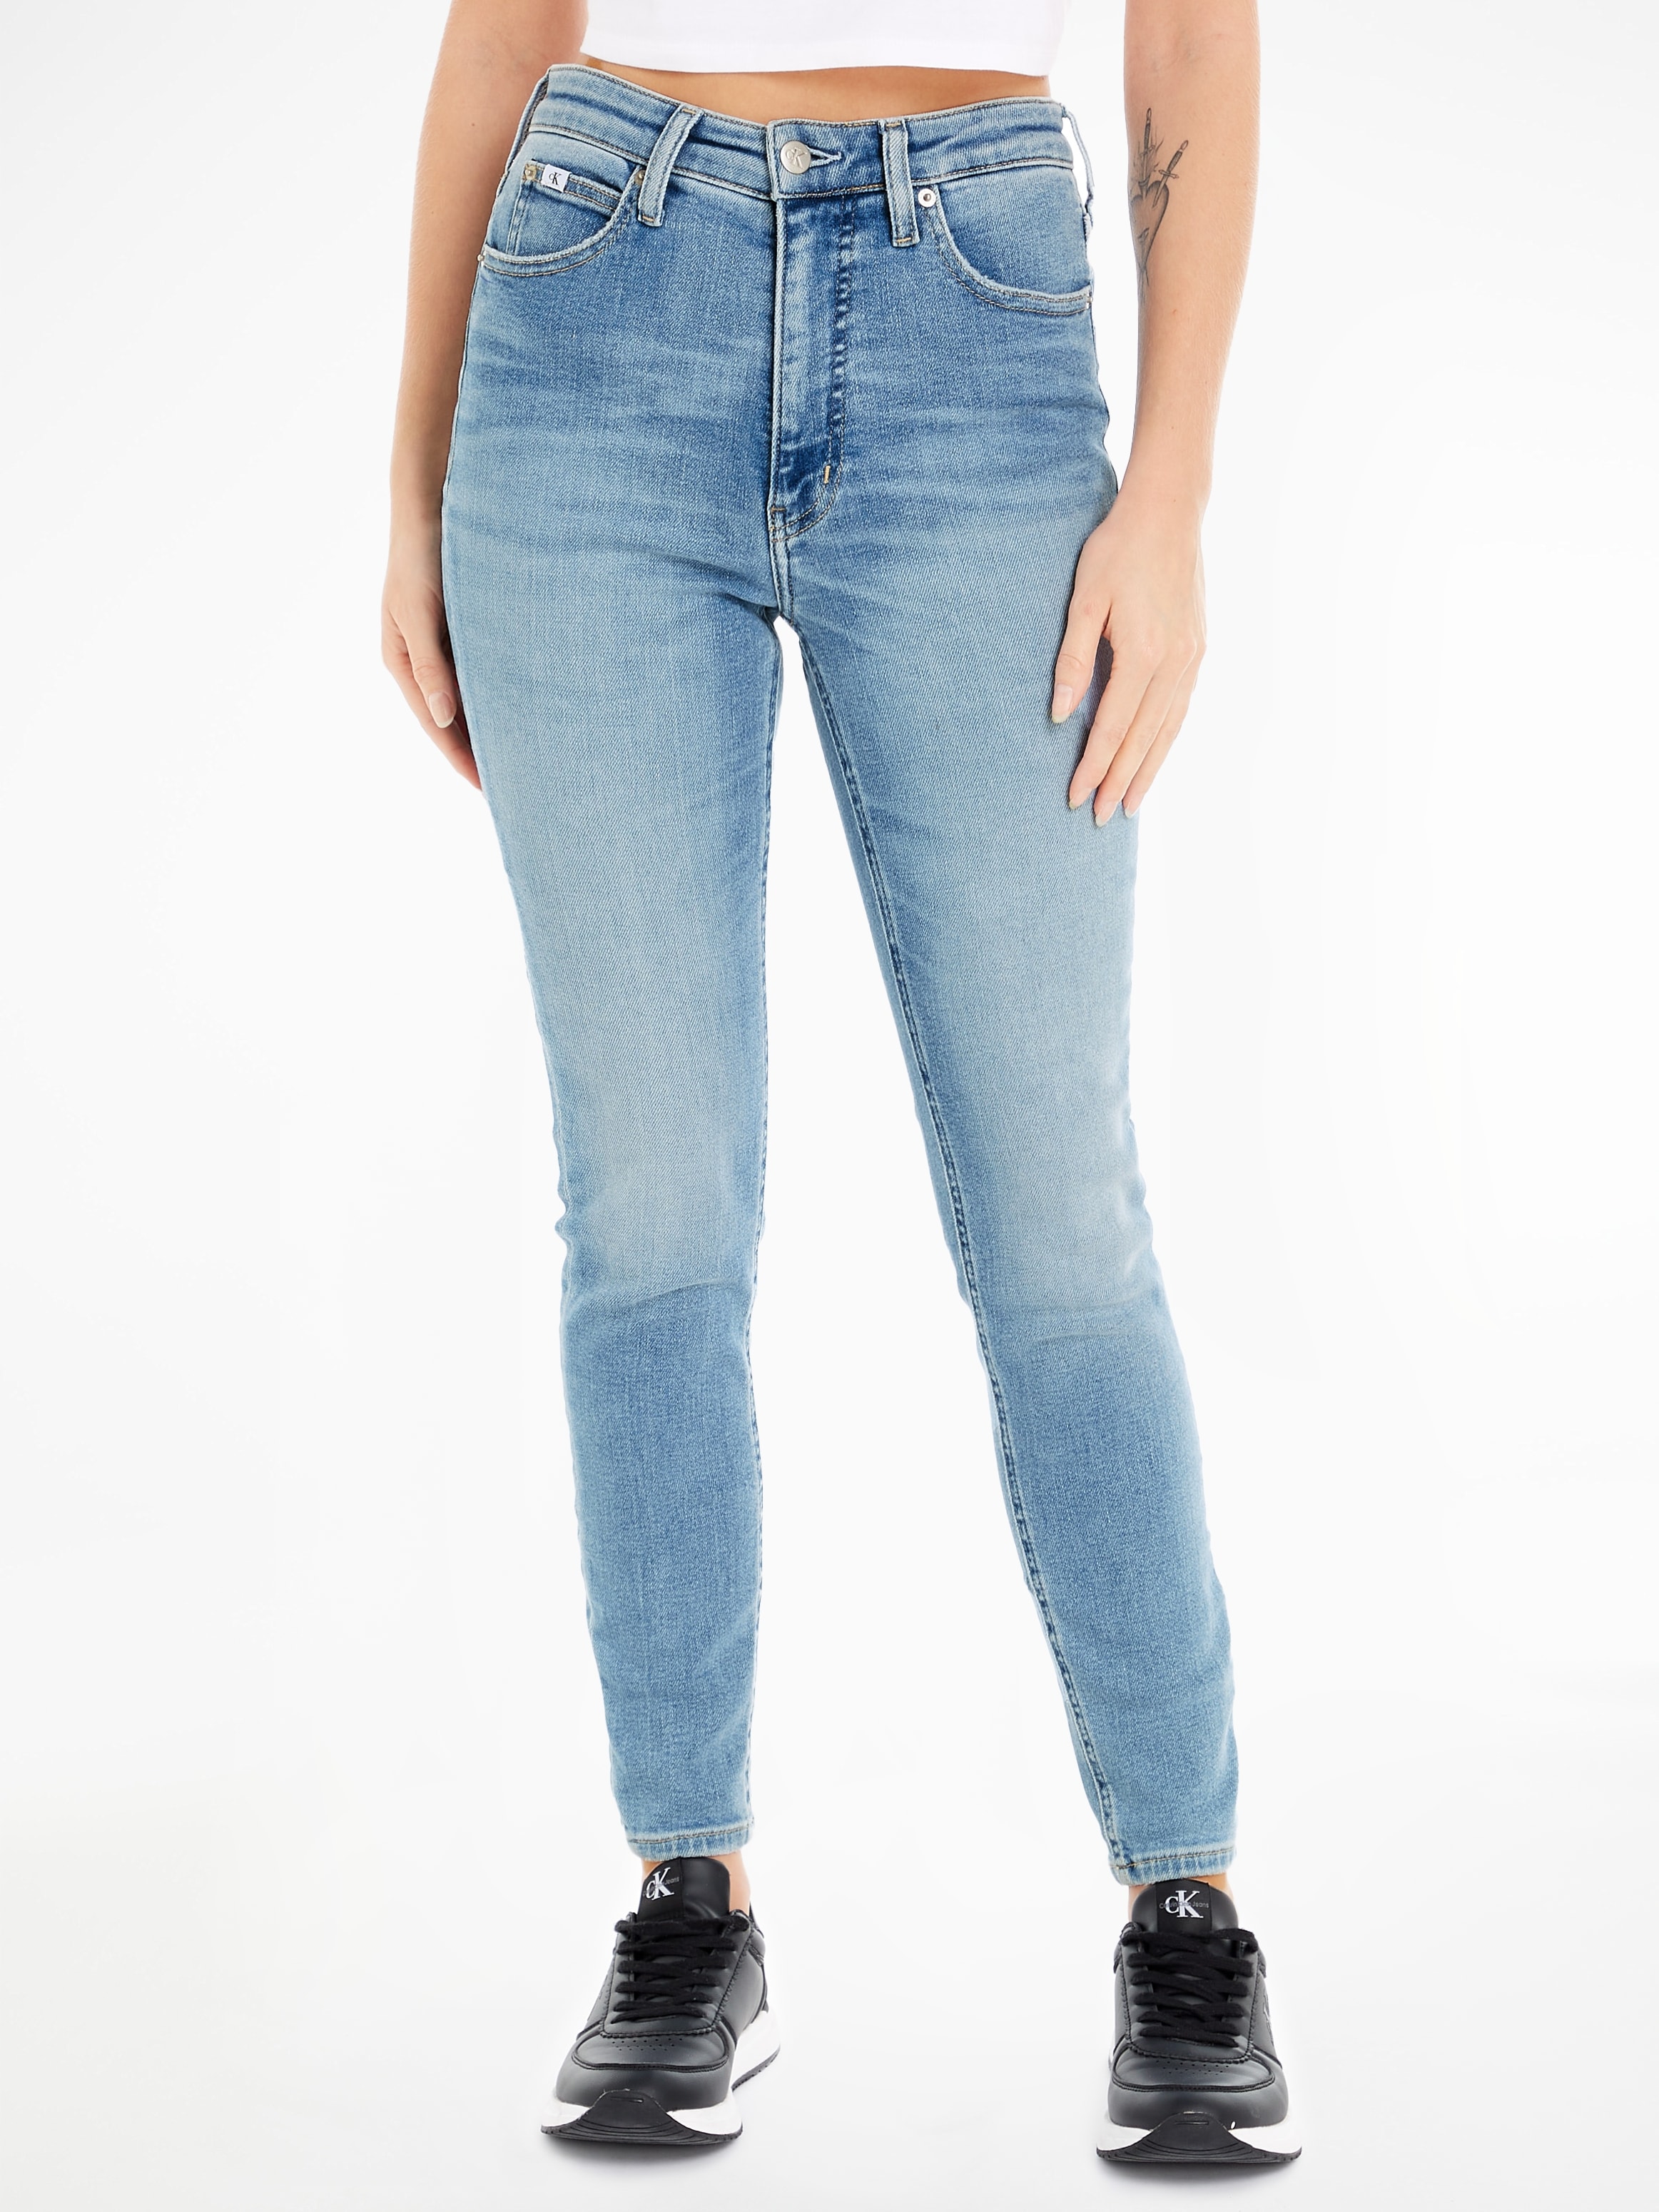 RISE Klein SUPER Skinny-fit-Jeans Jeans Calvin SKINNY »HIGH bei OTTO ANKLE«